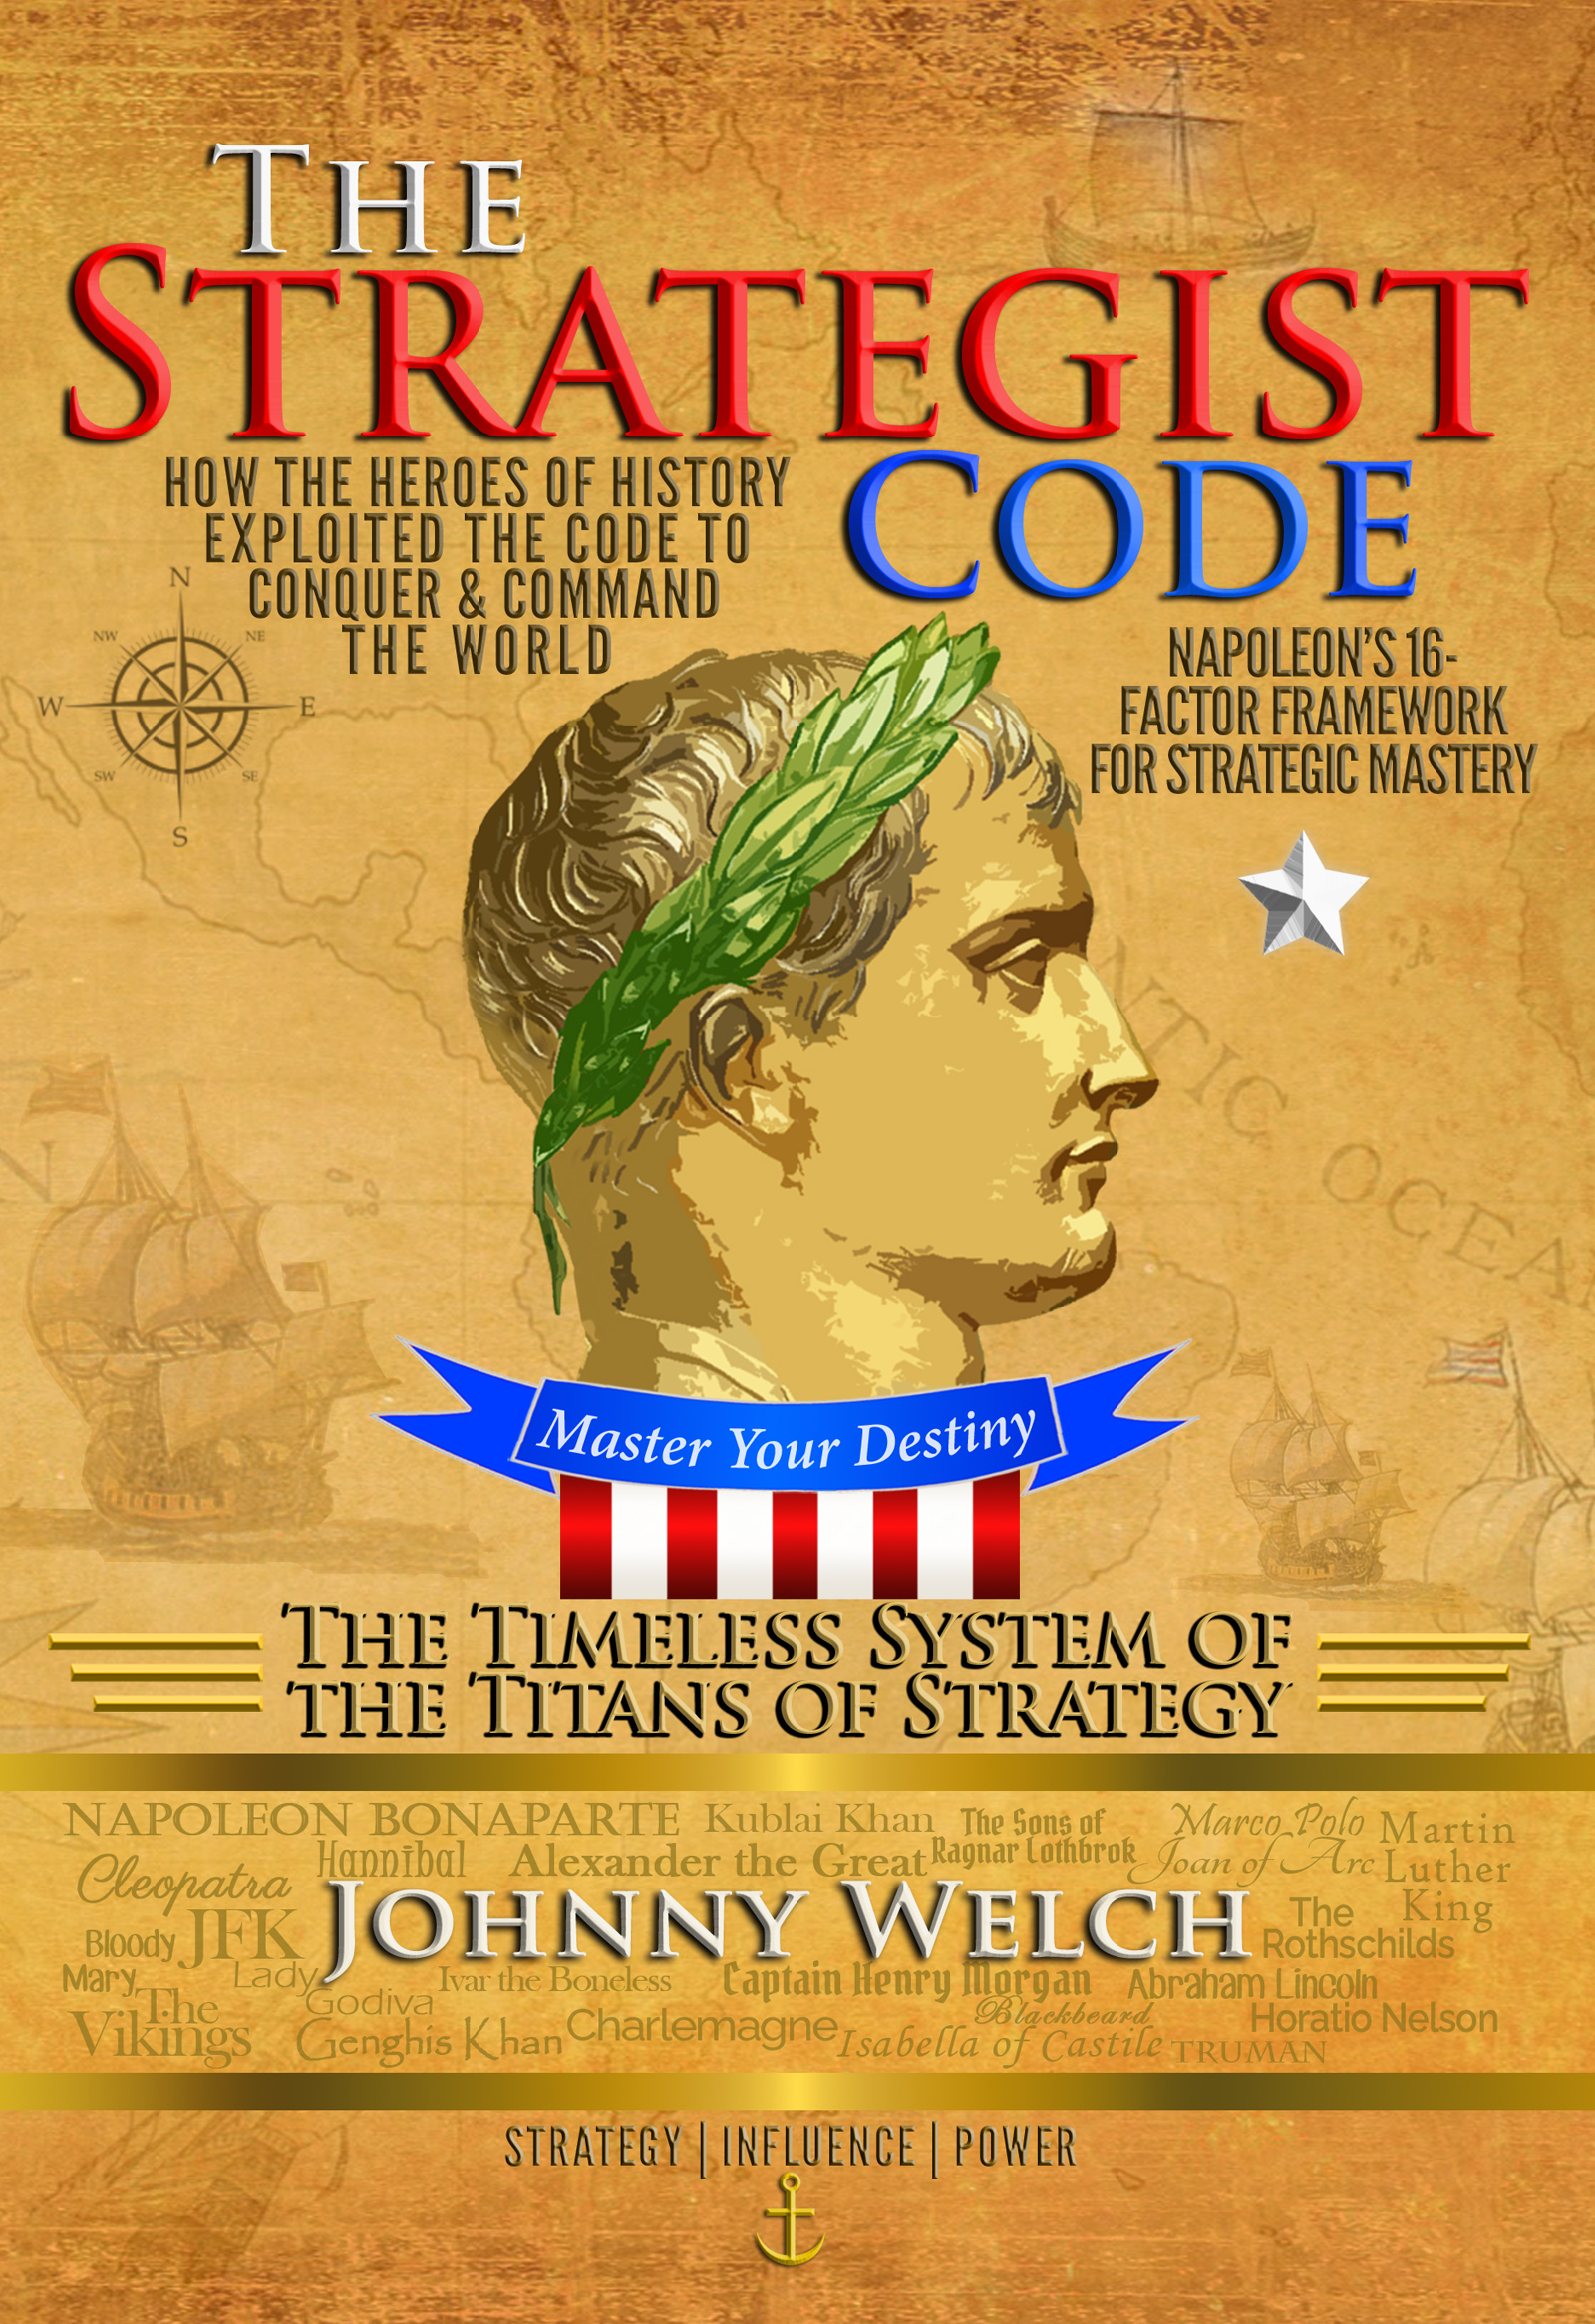 The Strategist Code: The Timeless System of the Titans of Strategy: How the Heroes of History Exploited the Code to Conquer and Command the World: Napoleon’s 16-Factor Framework for Strategic Mastery (New Book Cover Image)